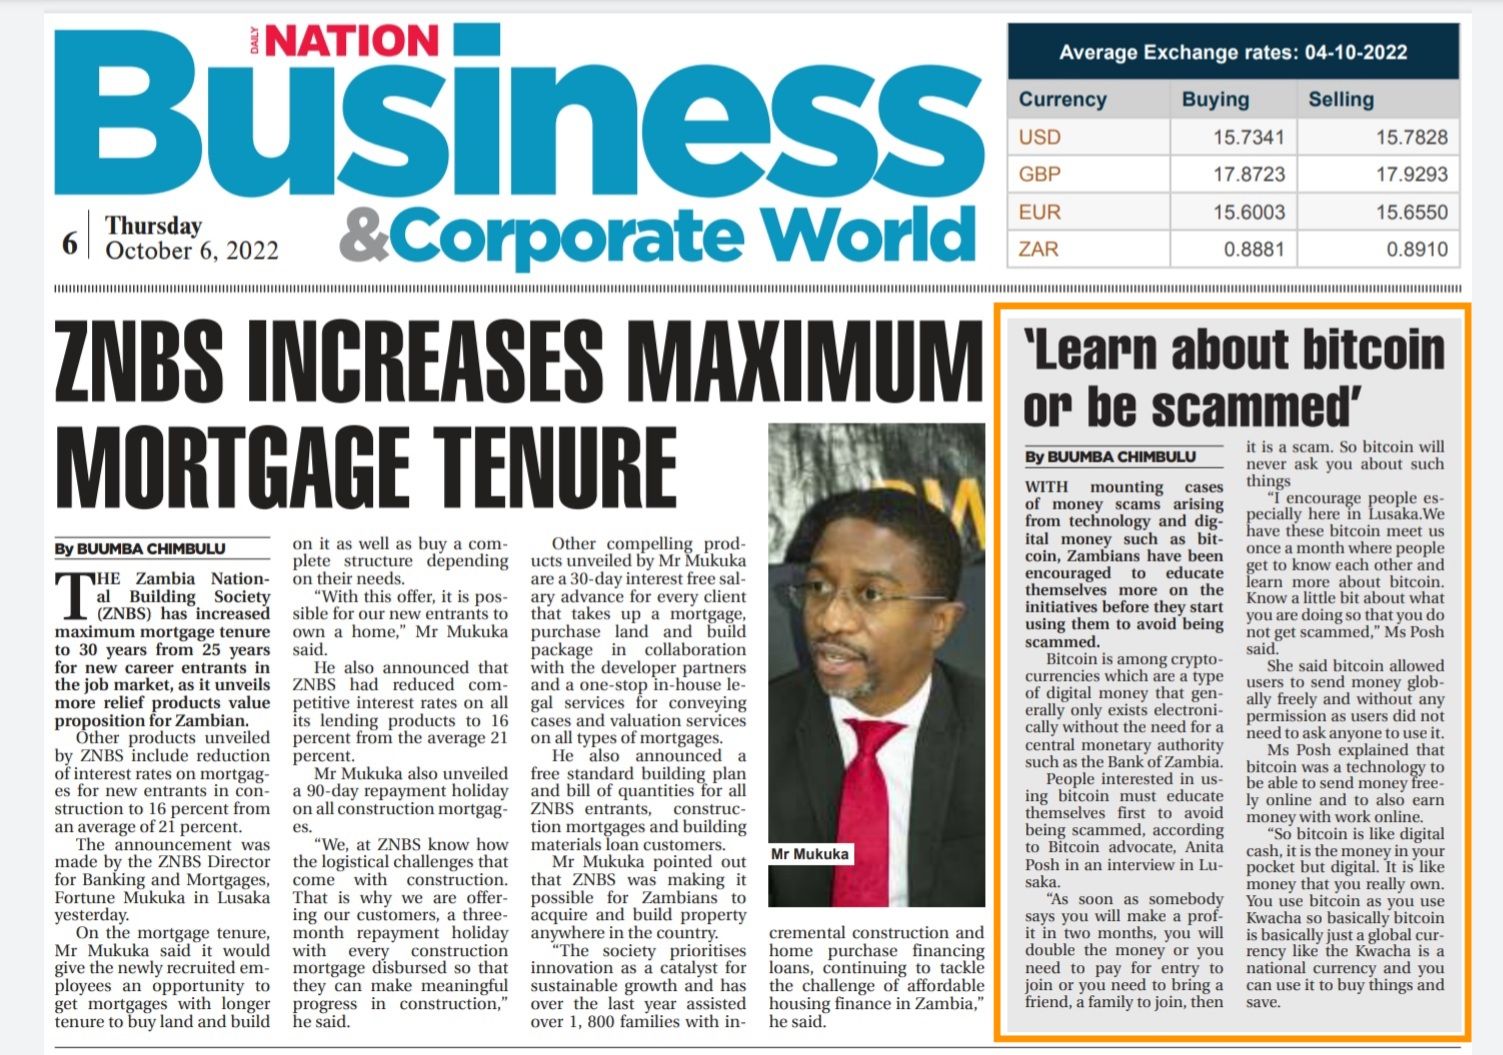 Article in Daily Nation Zambia, October 6 2022